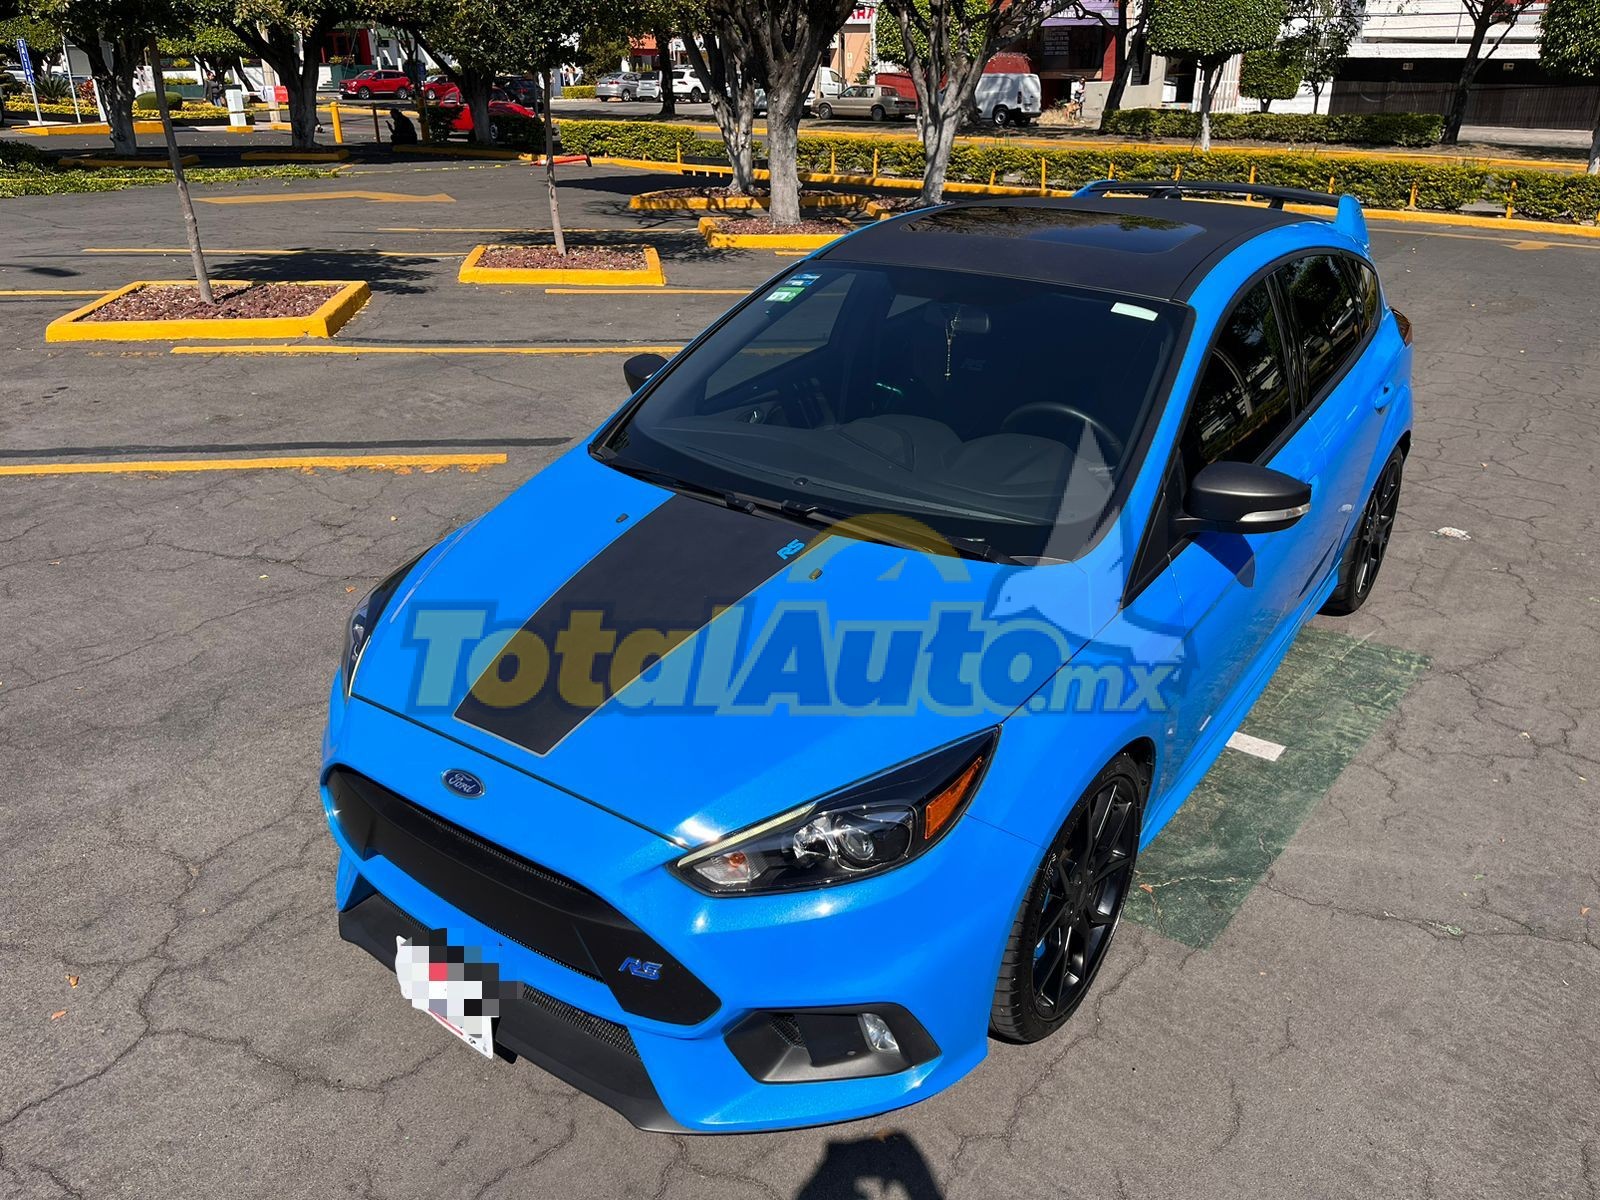 Ford Focus RS 2017 total auto mx (4)